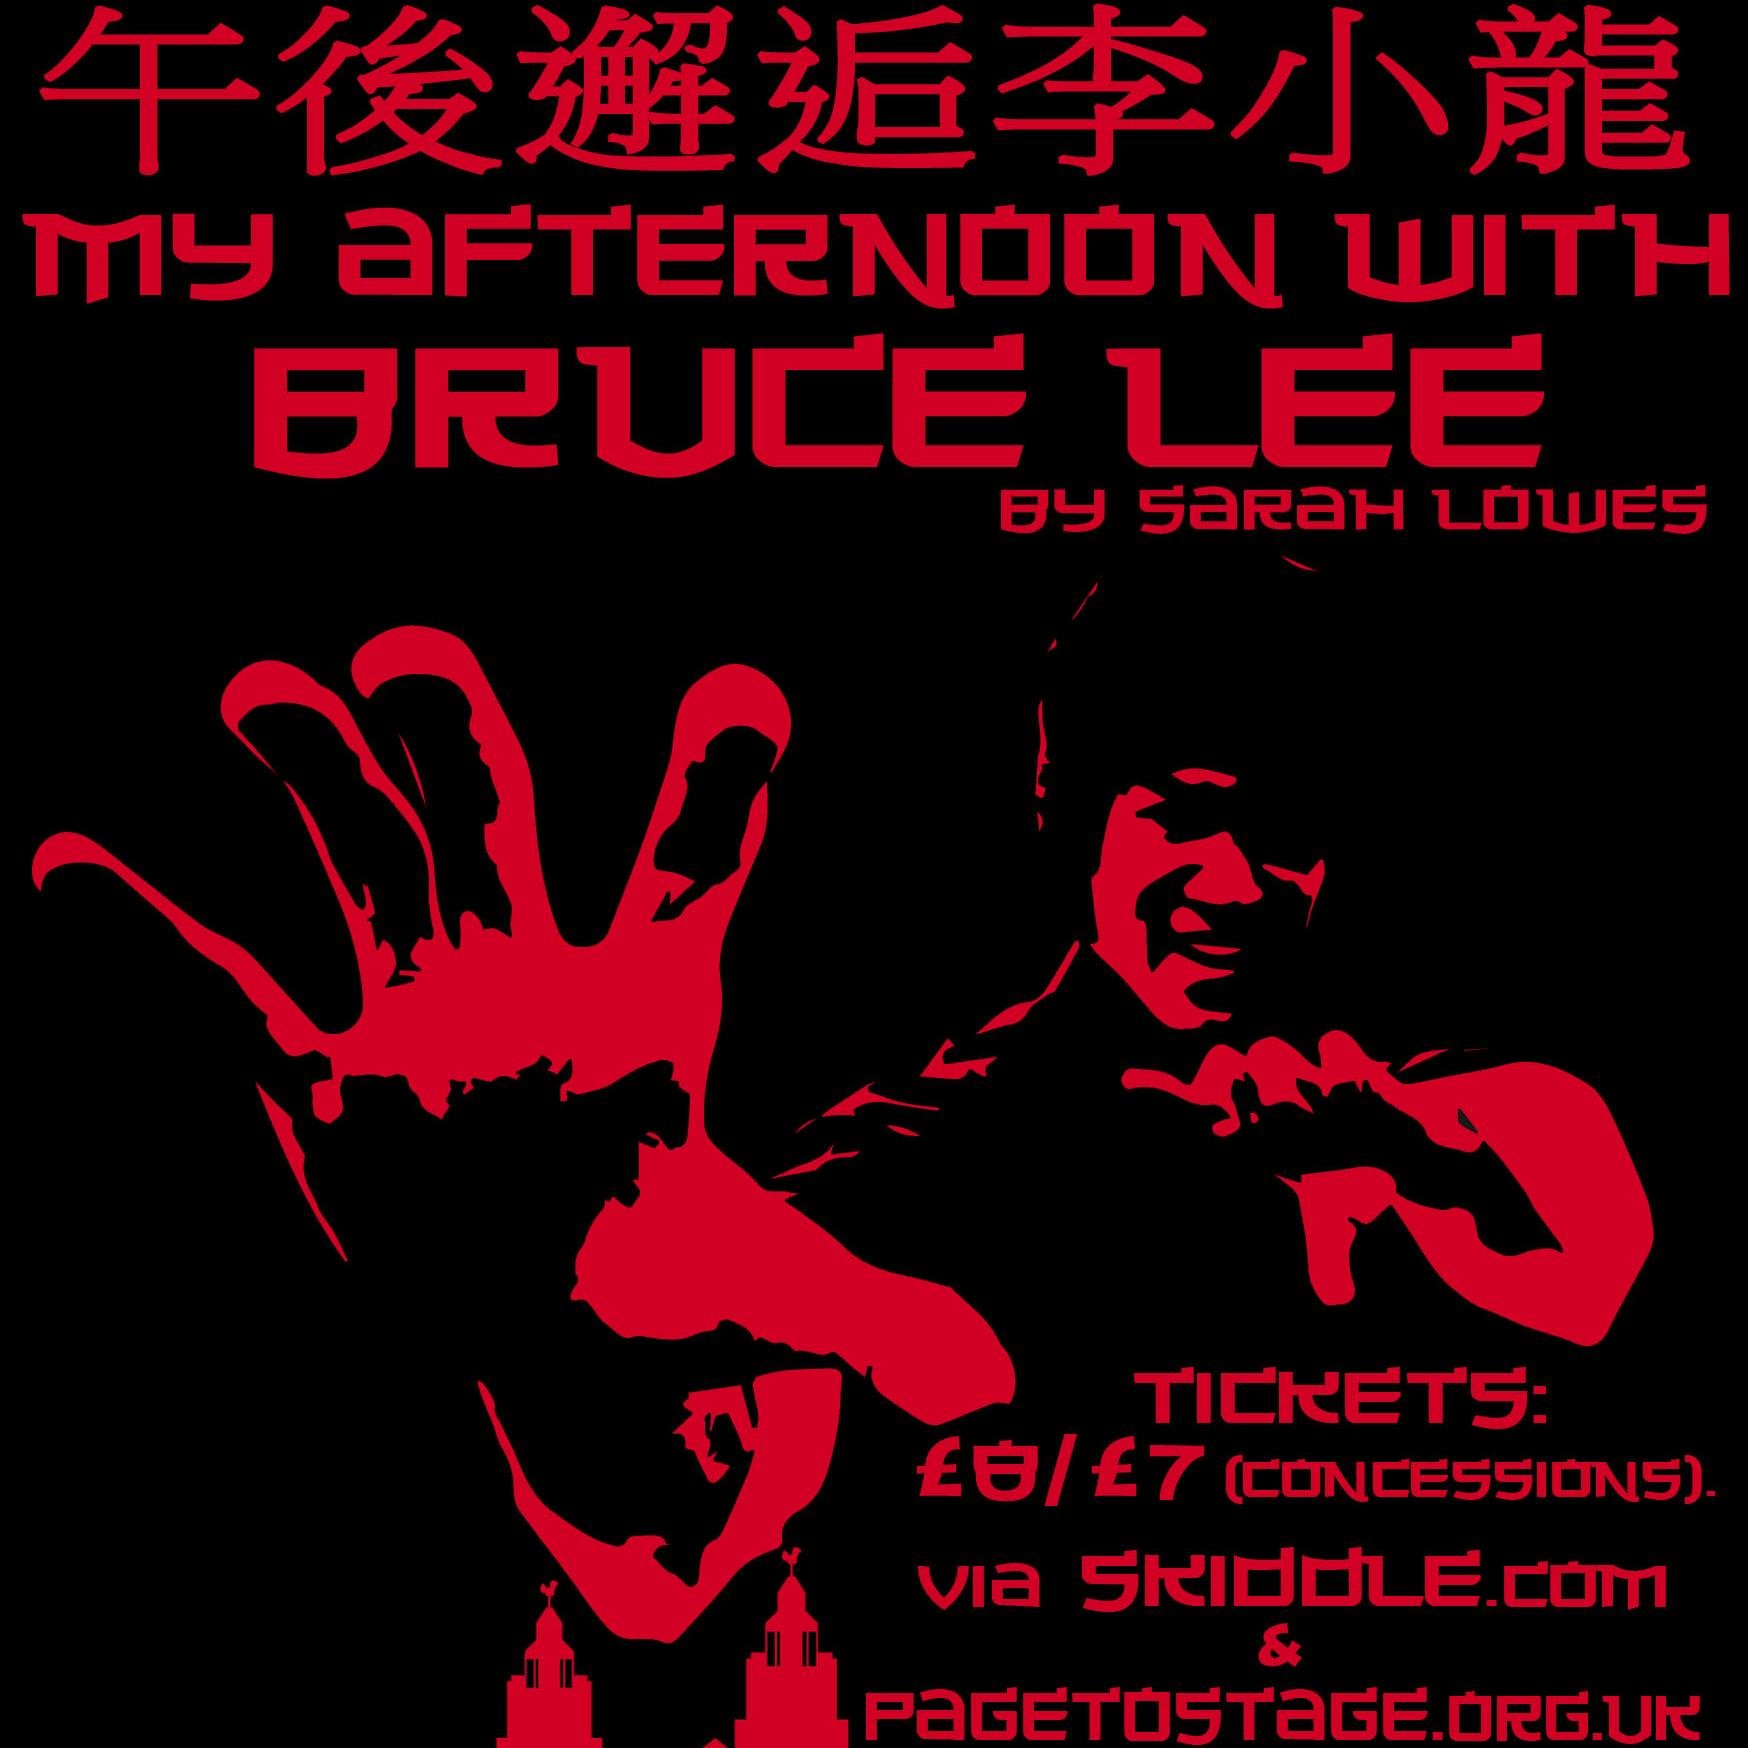 My Afternoon With Bruce Lee by Sarah Lowes. 1 Act Play for the Page To Stage Festival.